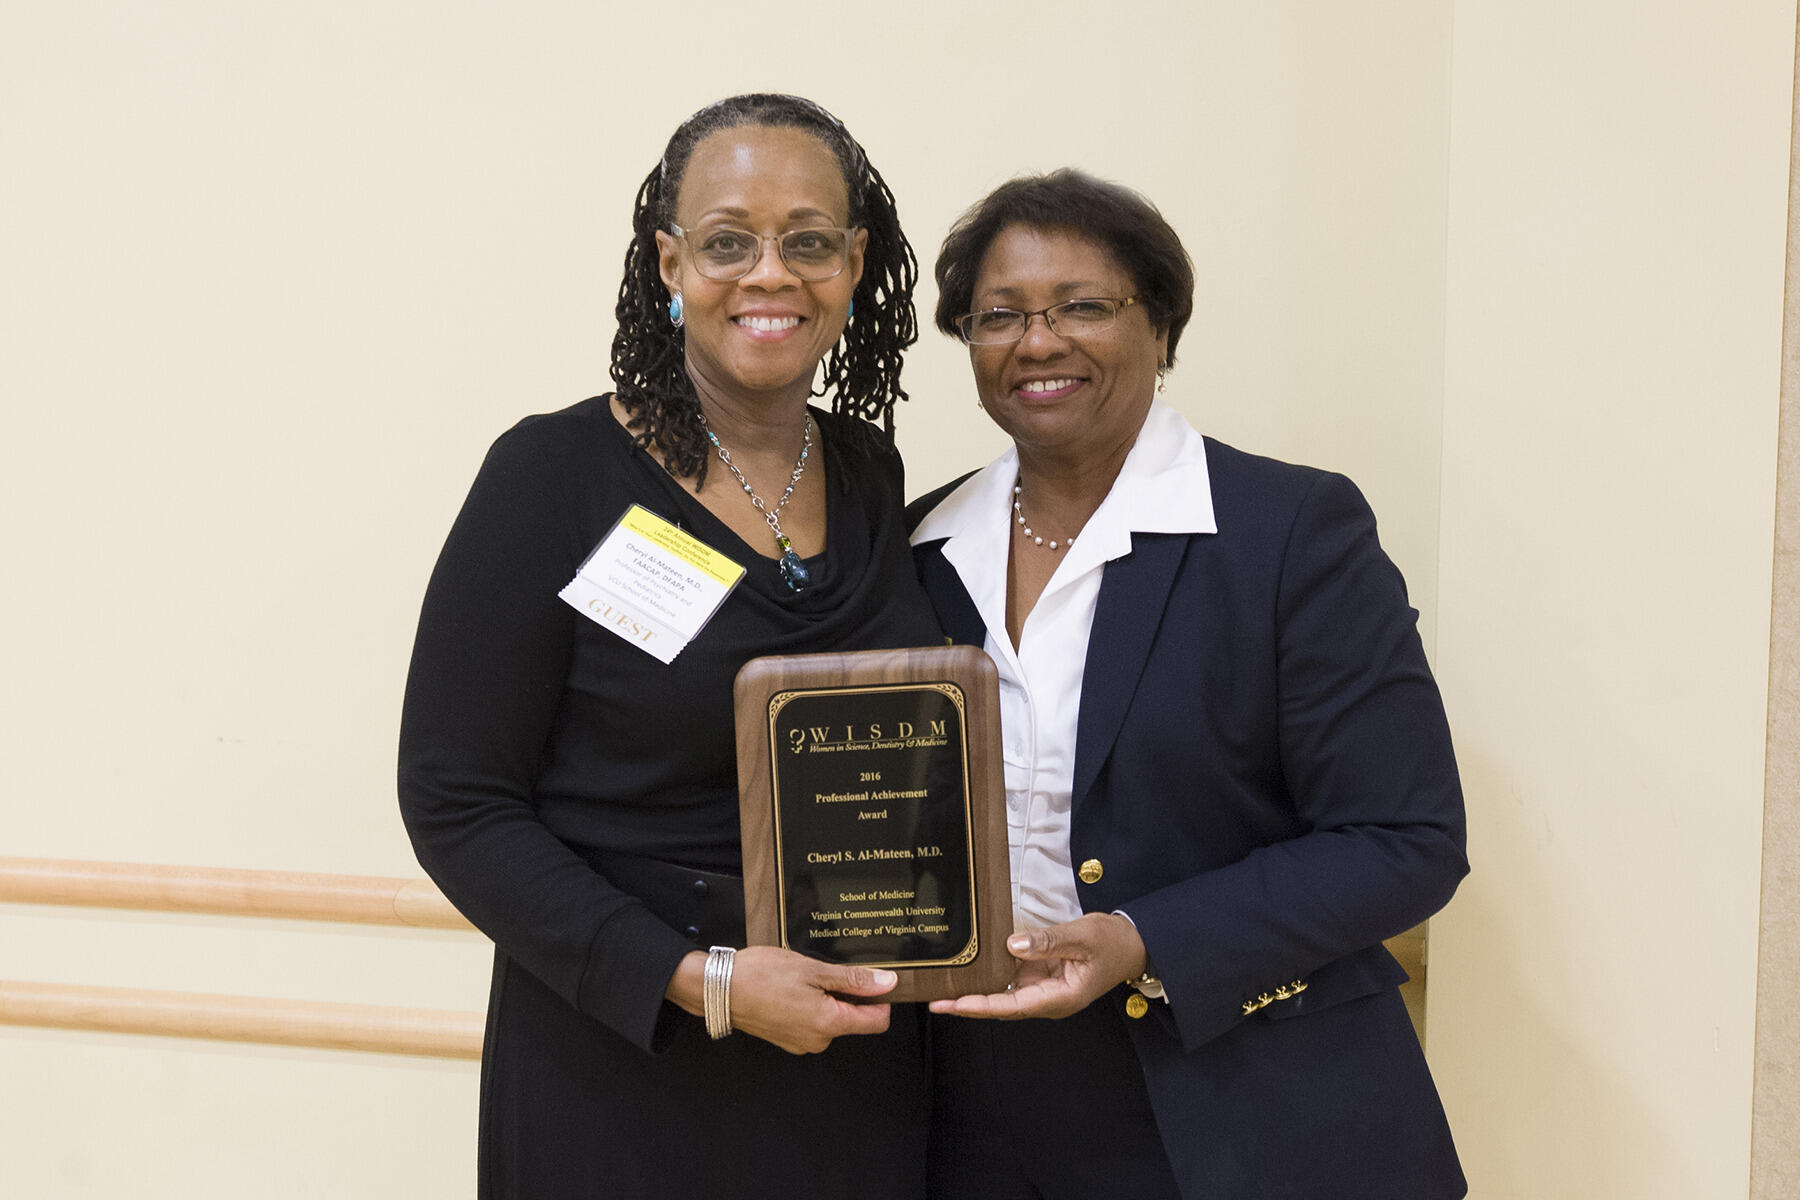 Cheryl S. Al-Mateen, M.D., (left) was one of the women honored with the WISDM Professional Achievement Award at this year’s conference. PonJola Coney, M.D., (right) presented the award. Photo by Thomas Kojcsich, University Marketing.